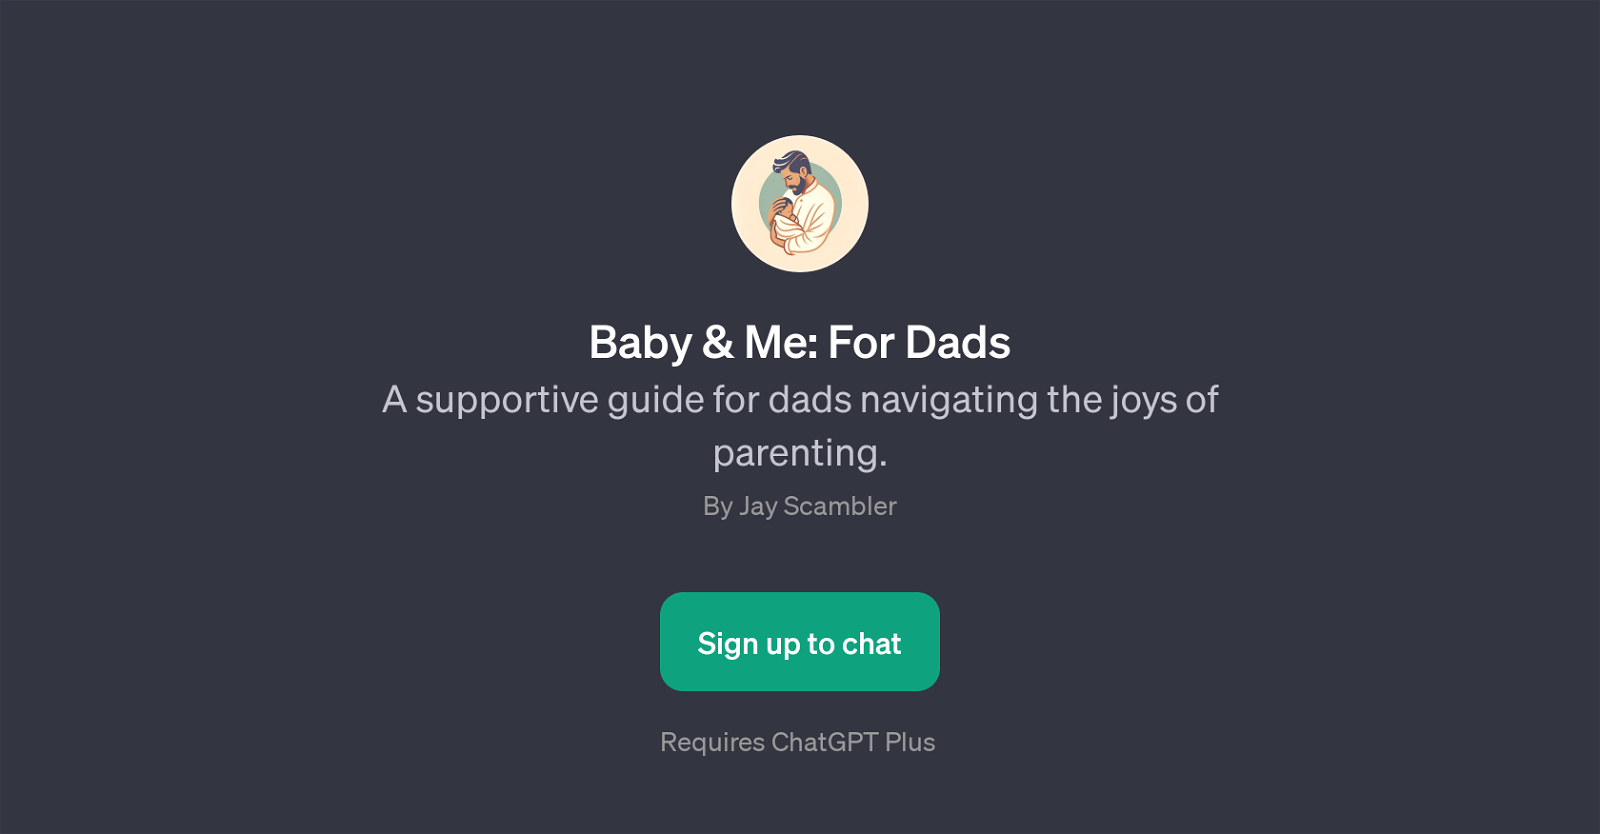 Baby & Me: For Dads website